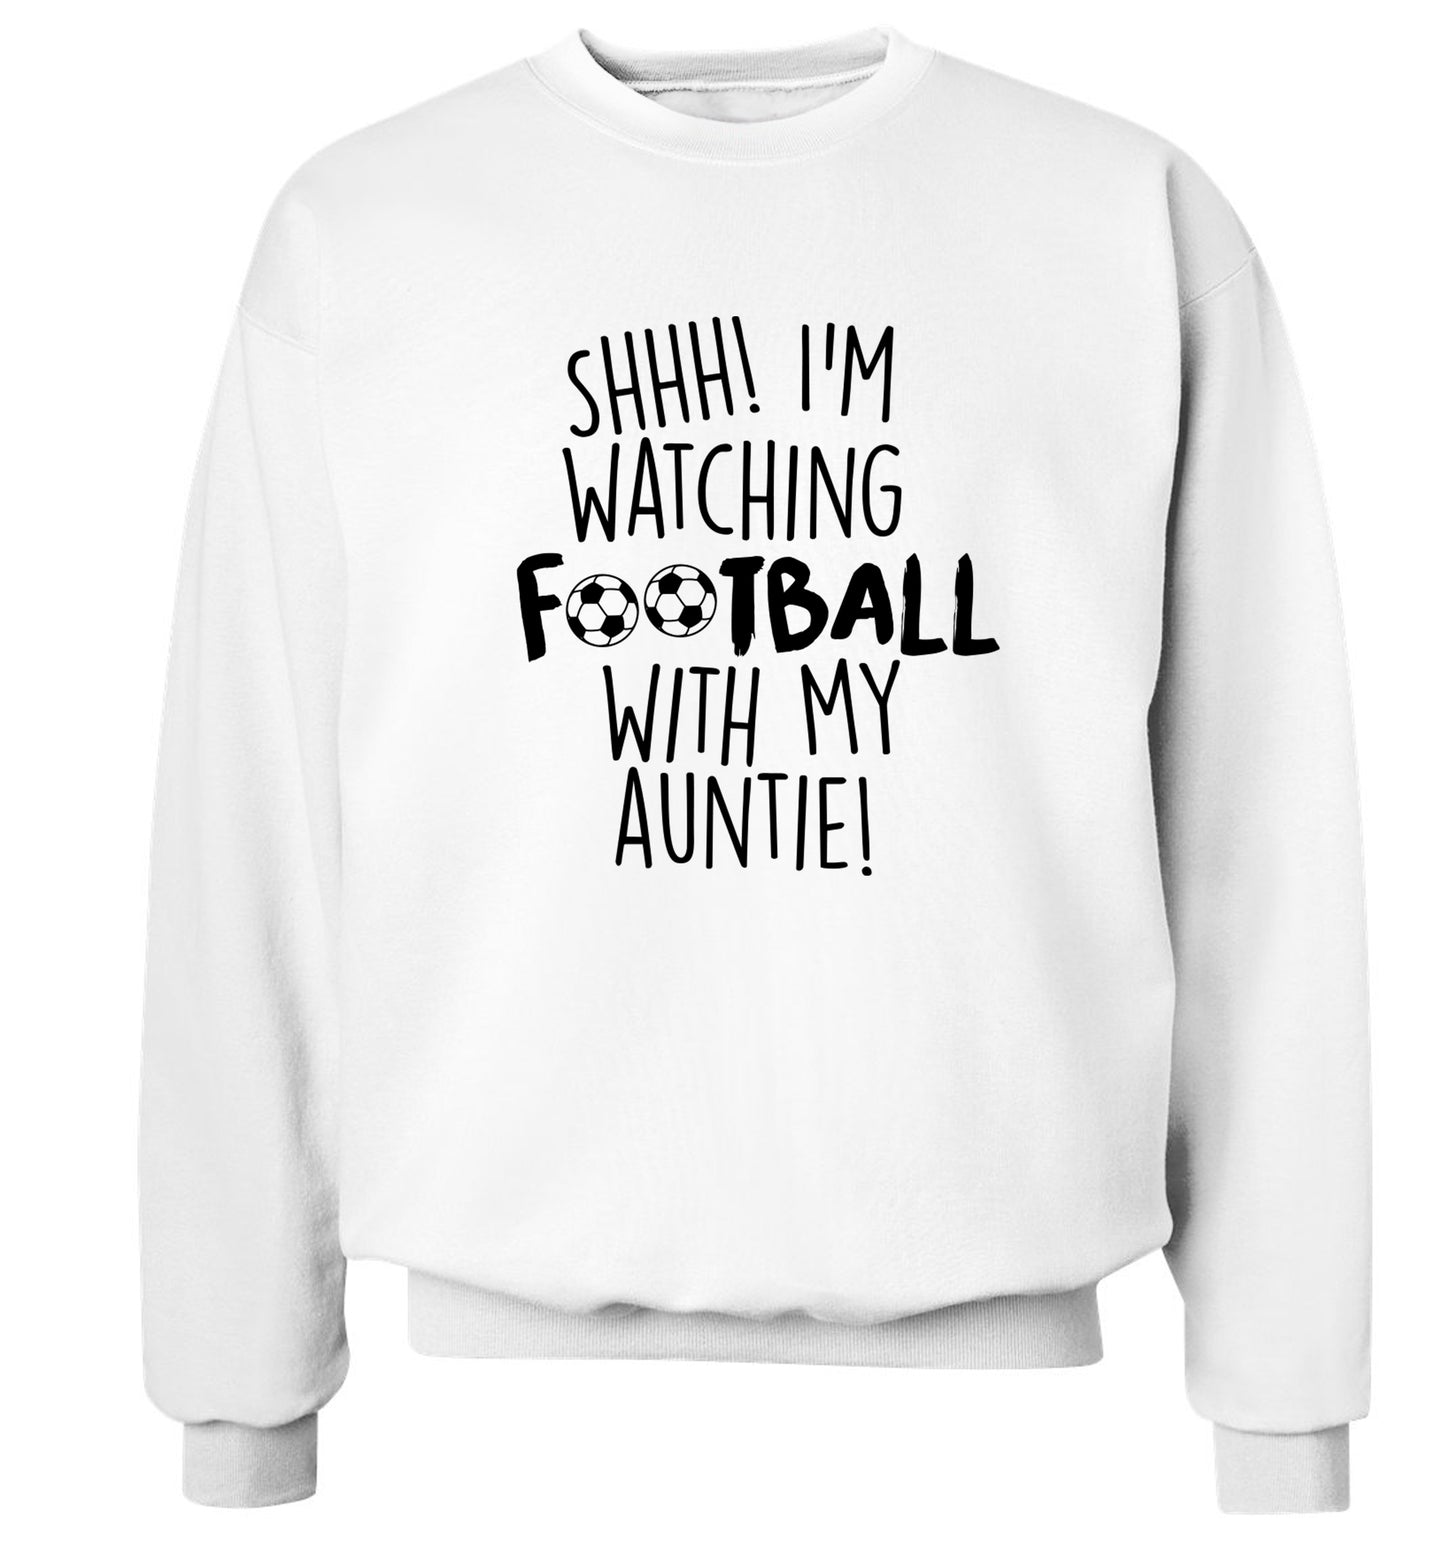 Shhh I'm watching football with my auntie Adult's unisexwhite Sweater 2XL